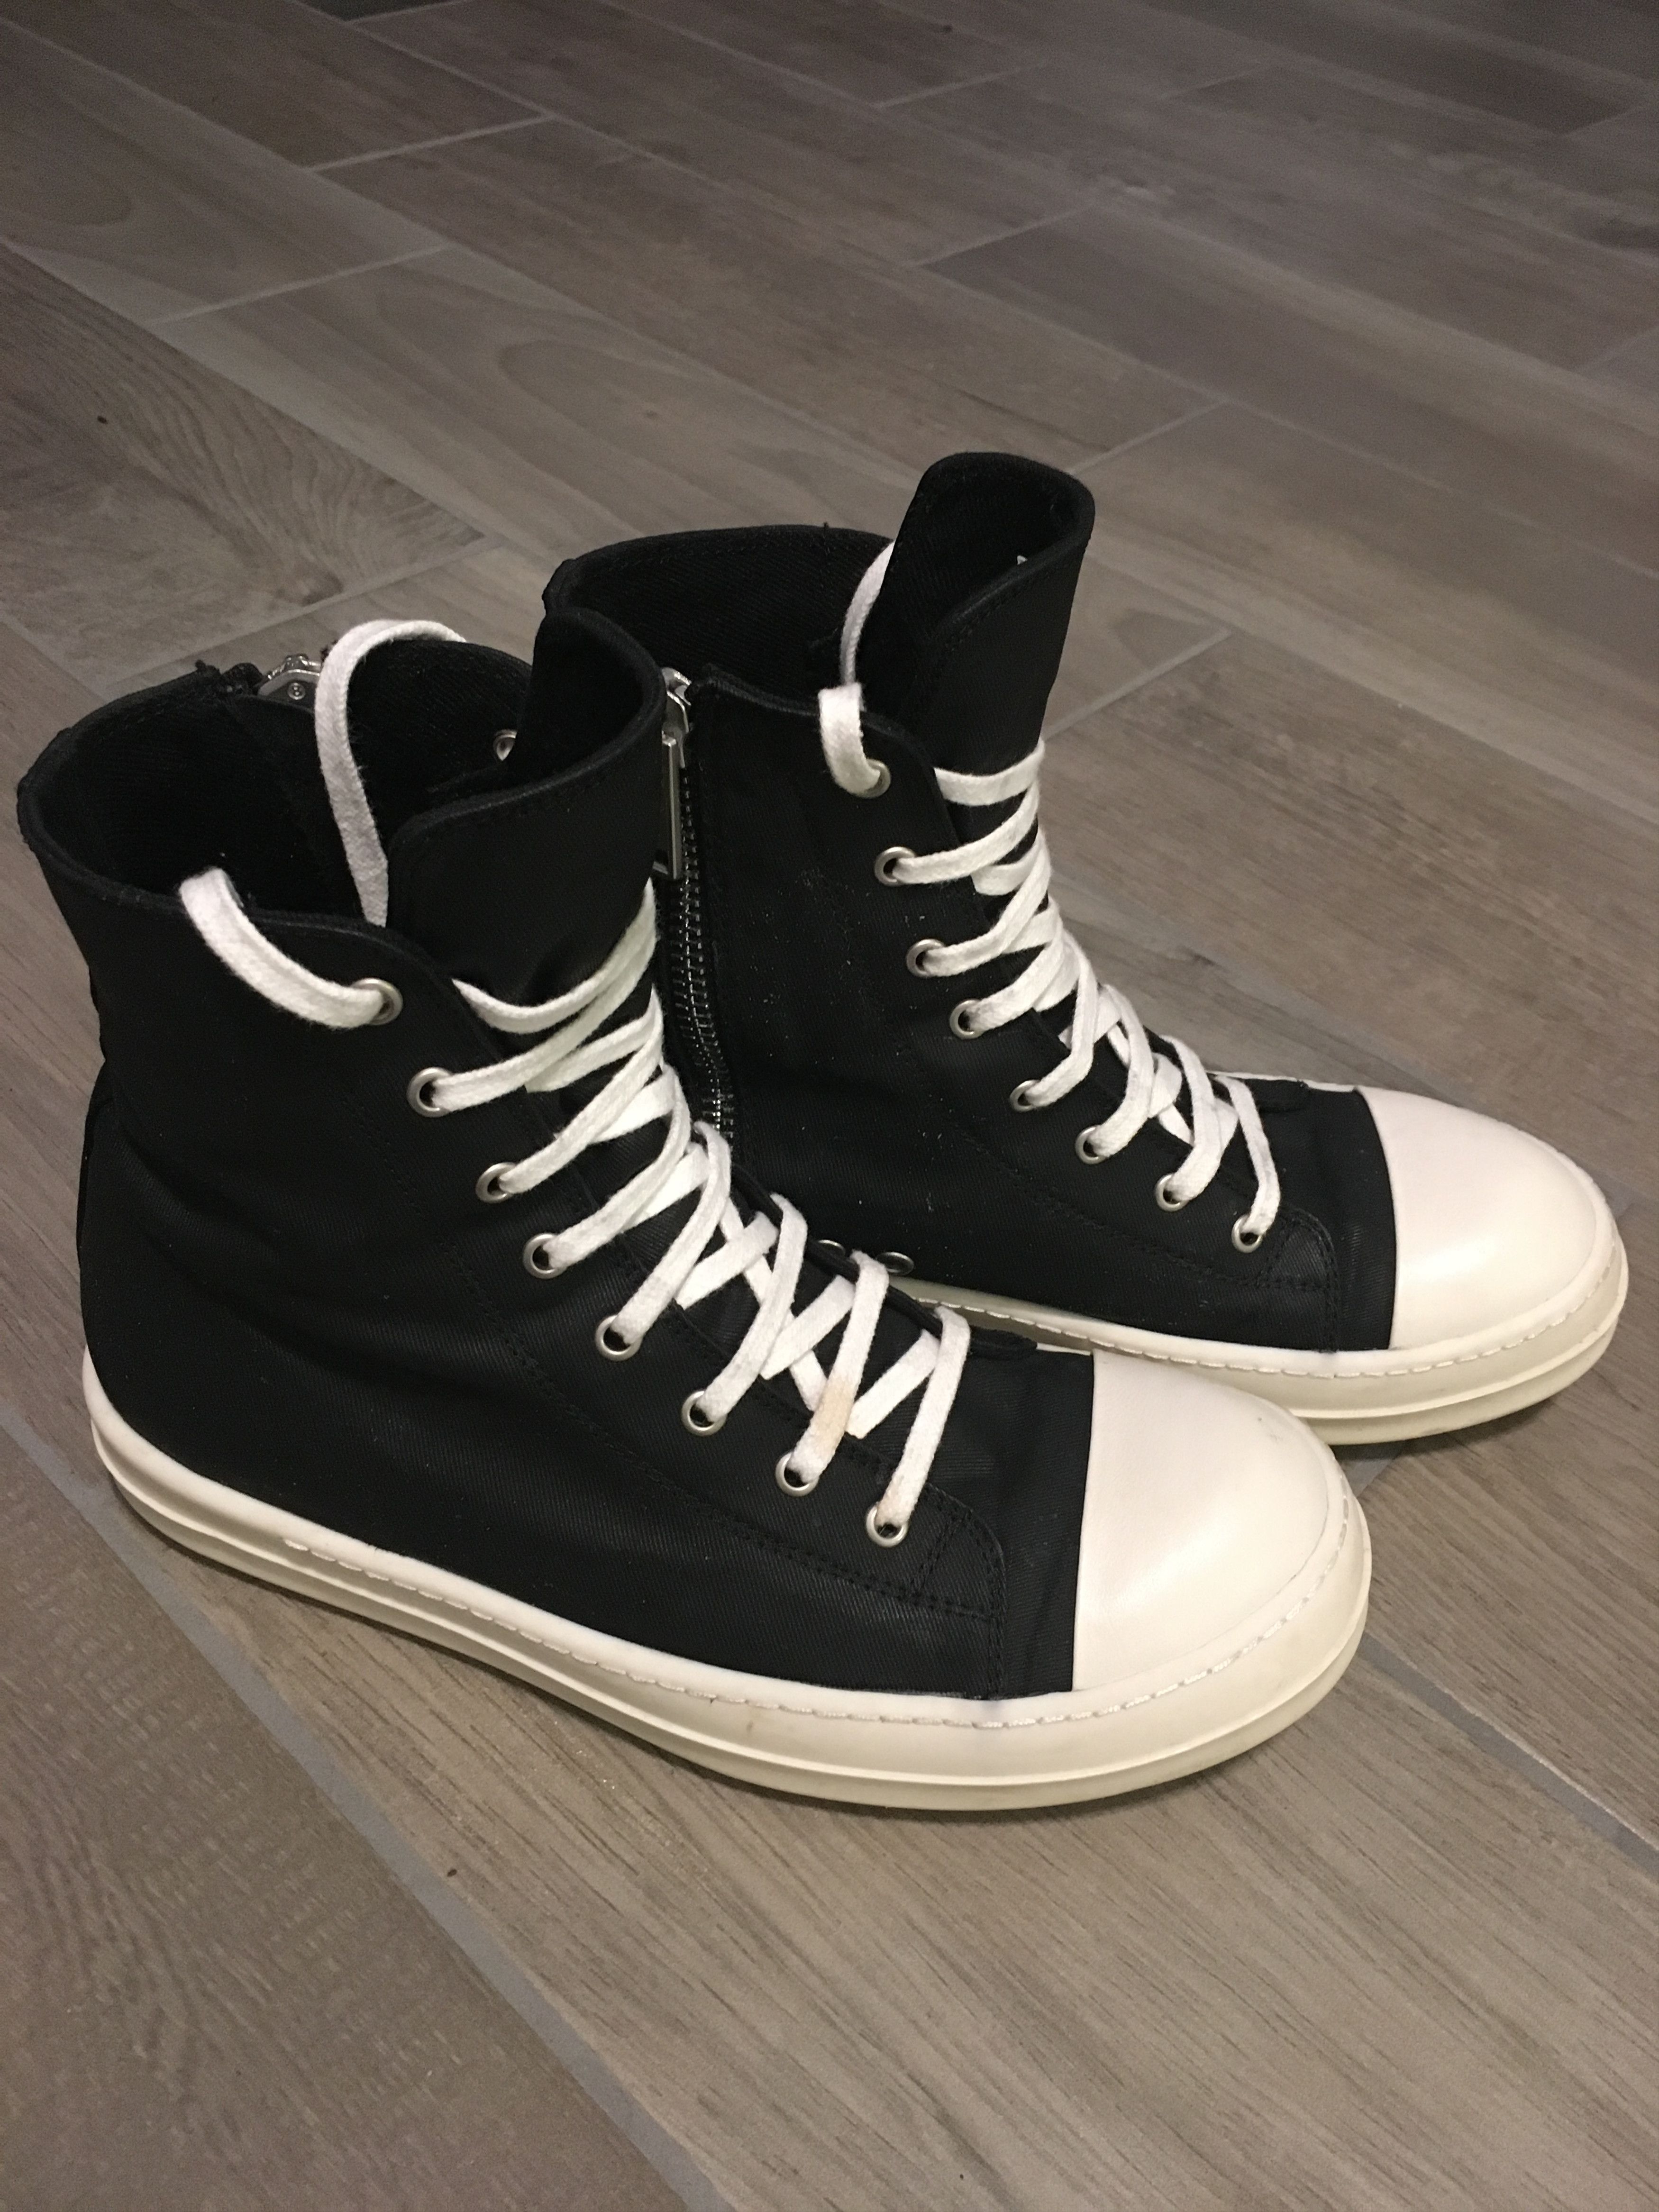 Rick Owens Drkshdw Waxed Ramones Size US 7 / EU 40 - 1 Preview